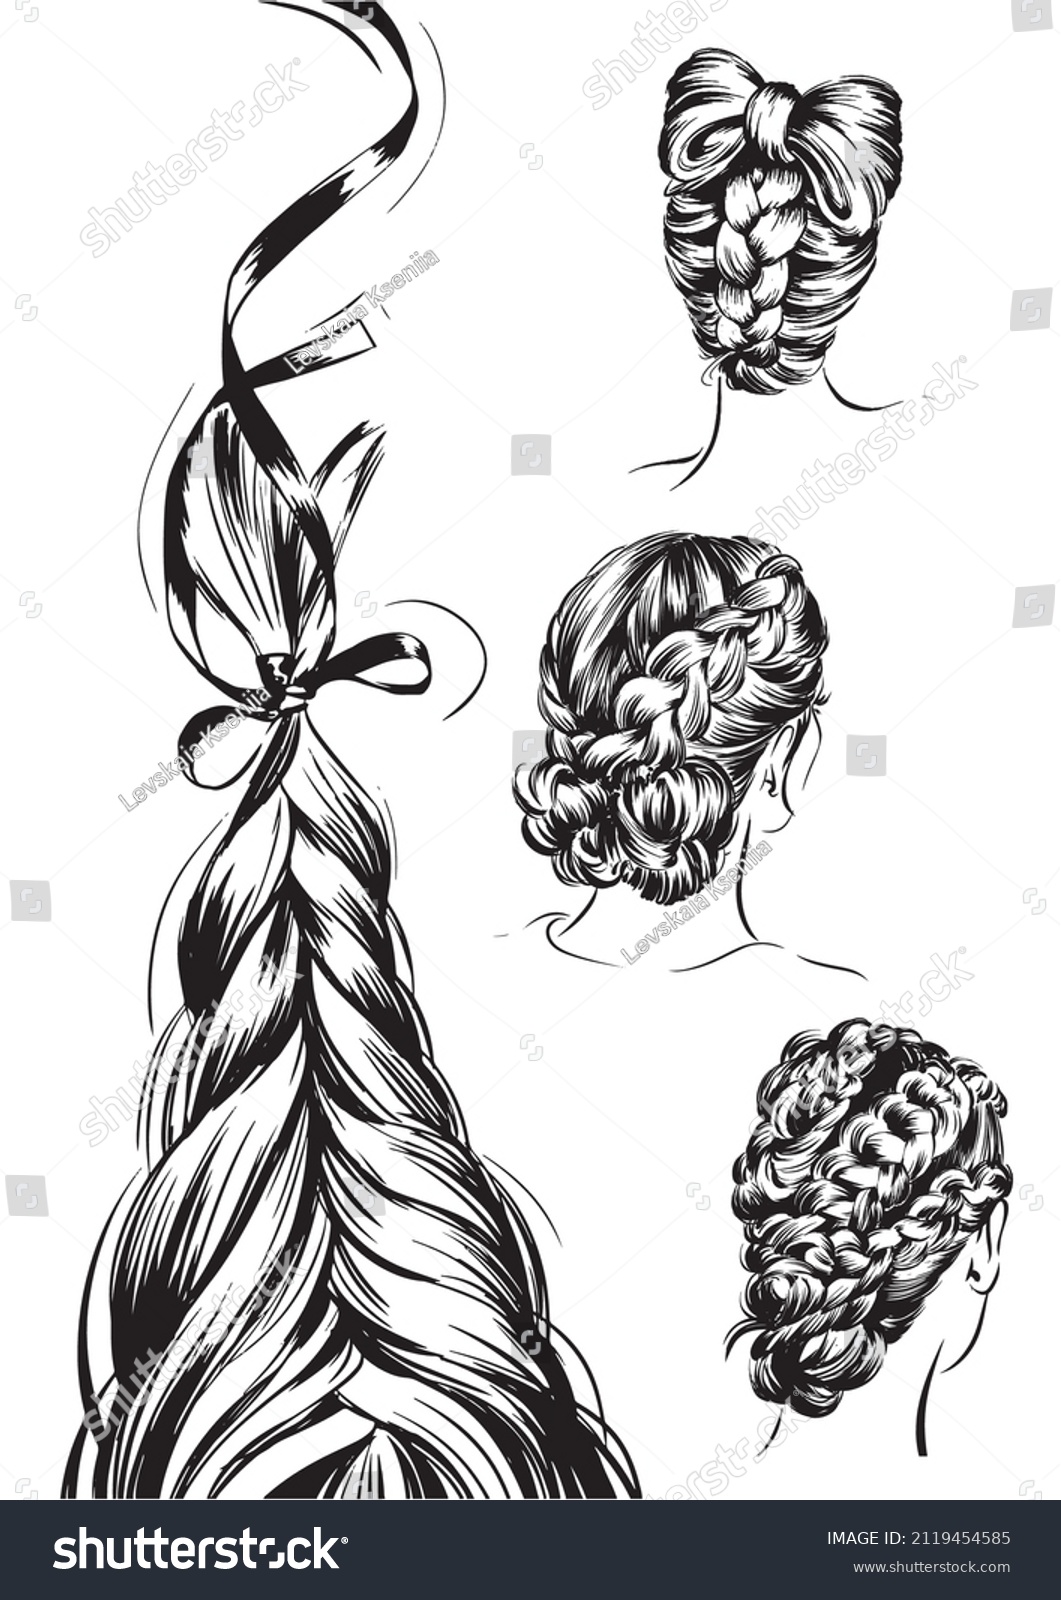 Fashion Illustration Set Braided Hairstyles Stock Vector Royalty Free 2119454585 Shutterstock 